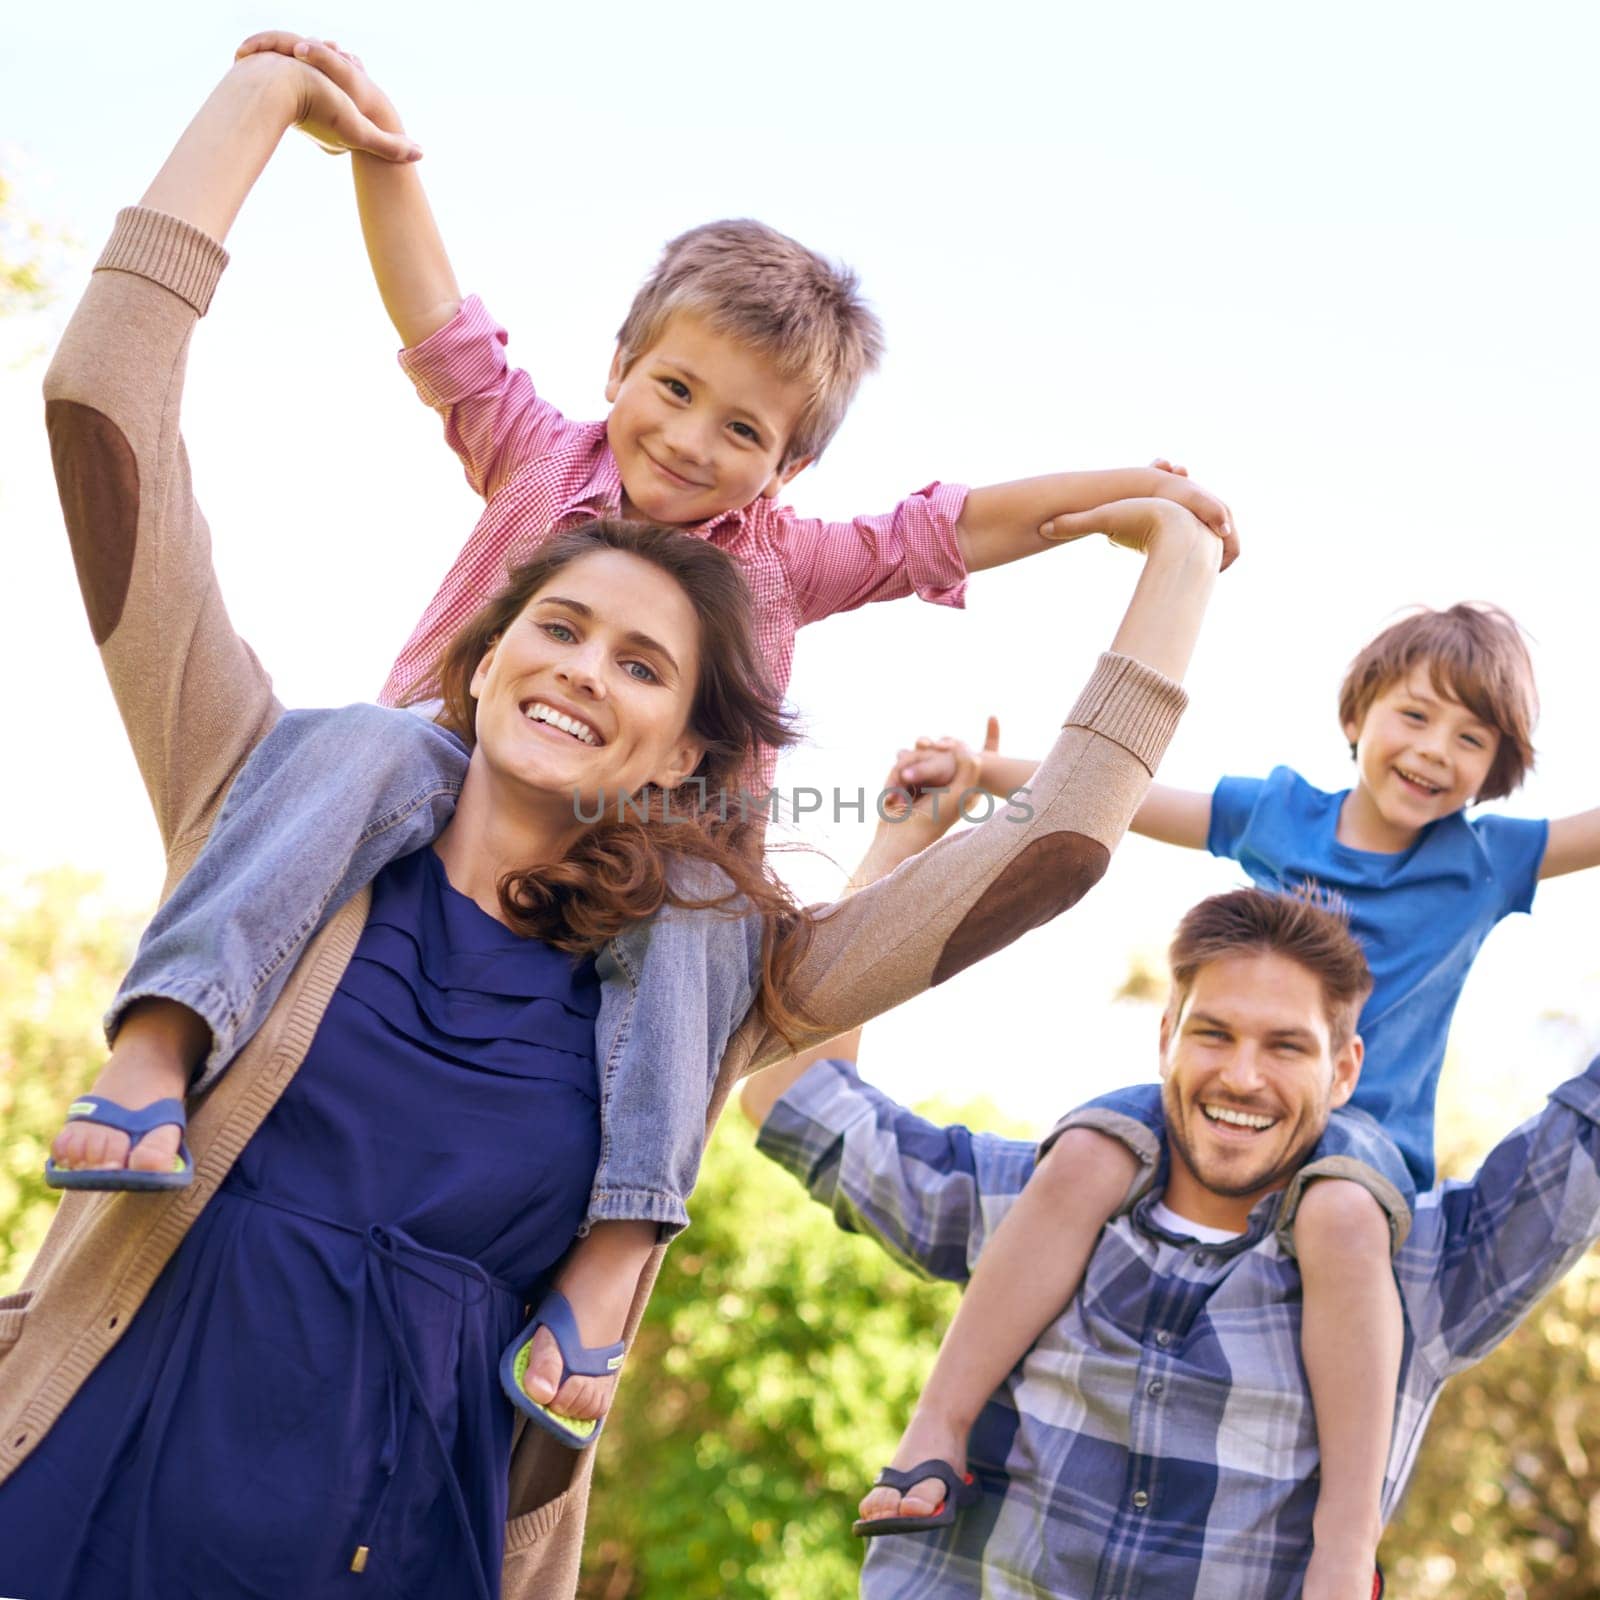 Smile, nature and children on parents shoulders in outdoor park or field for playing together. Happy, bonding and low angle portrait of mother and father carrying boy kids for fun in garden in Canada.